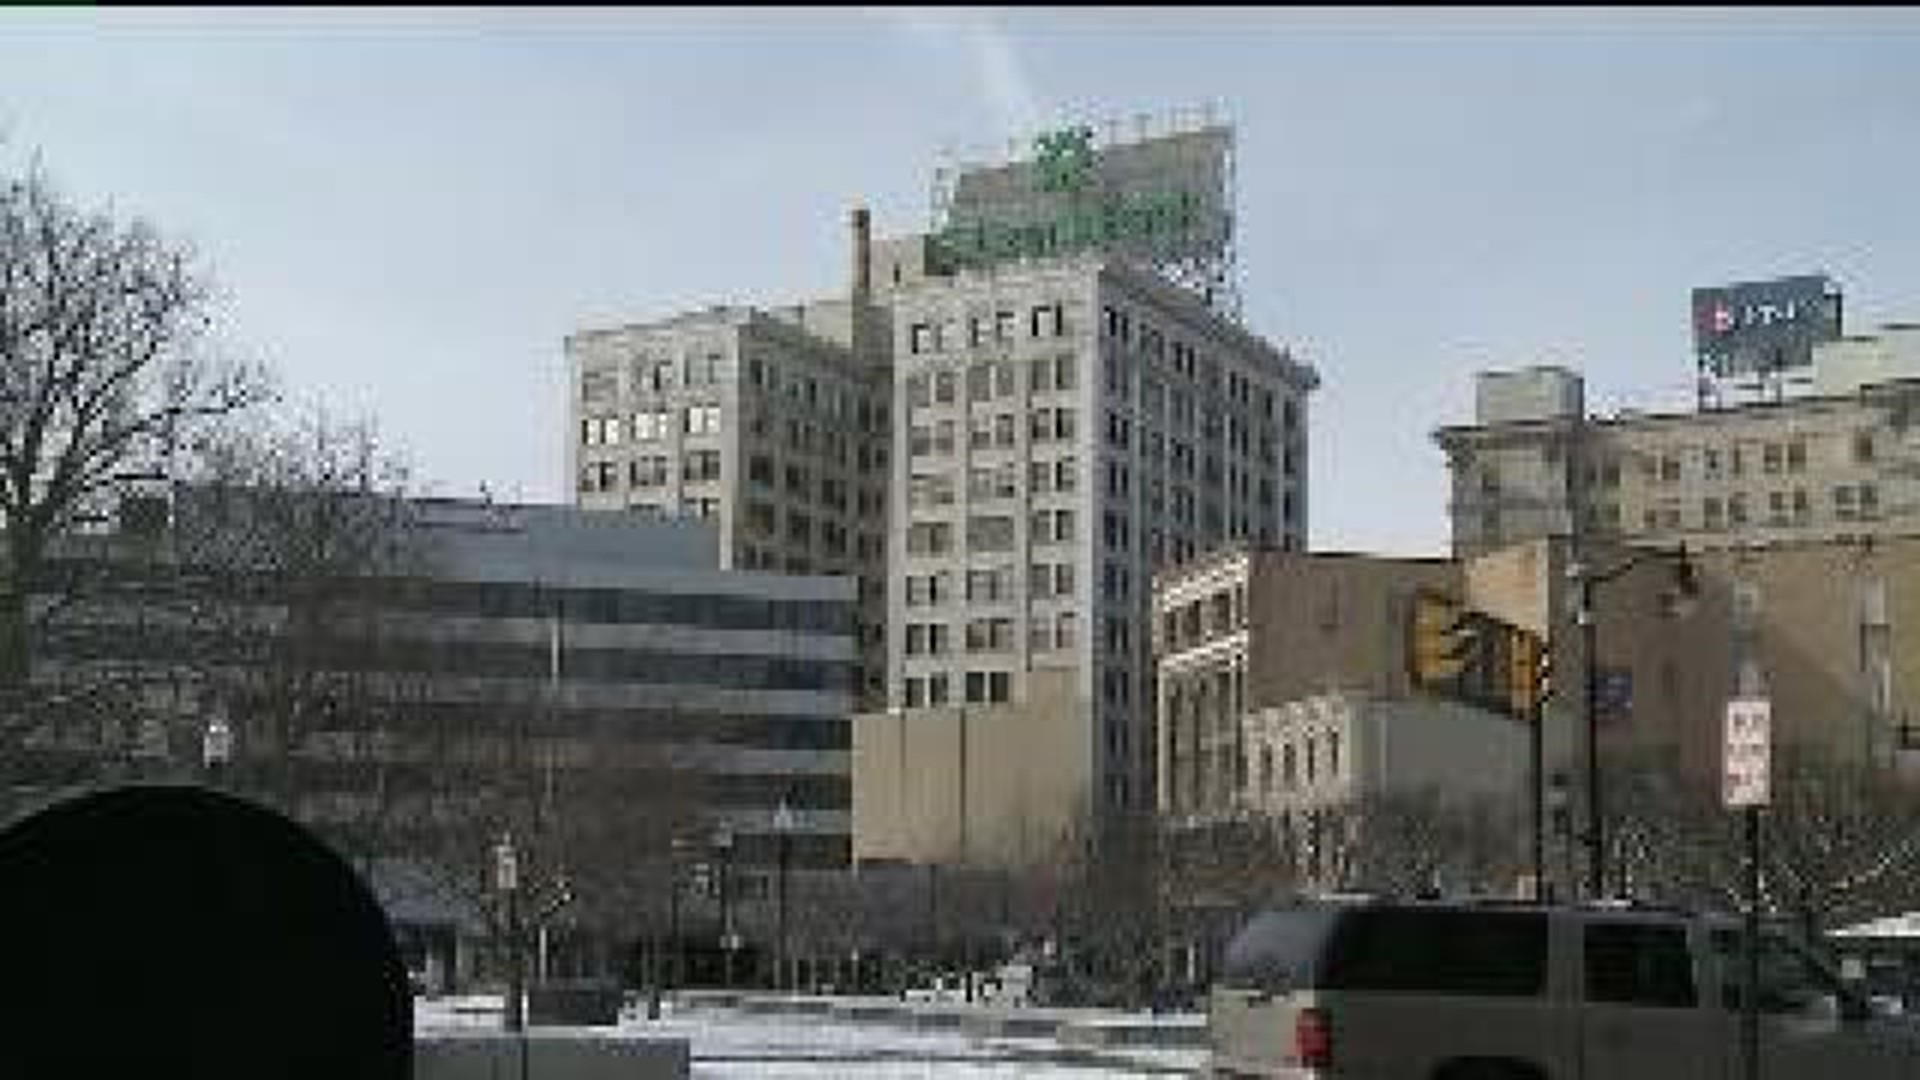 Luxury Apartments Coming To High-Rise in Wilkes-Barre